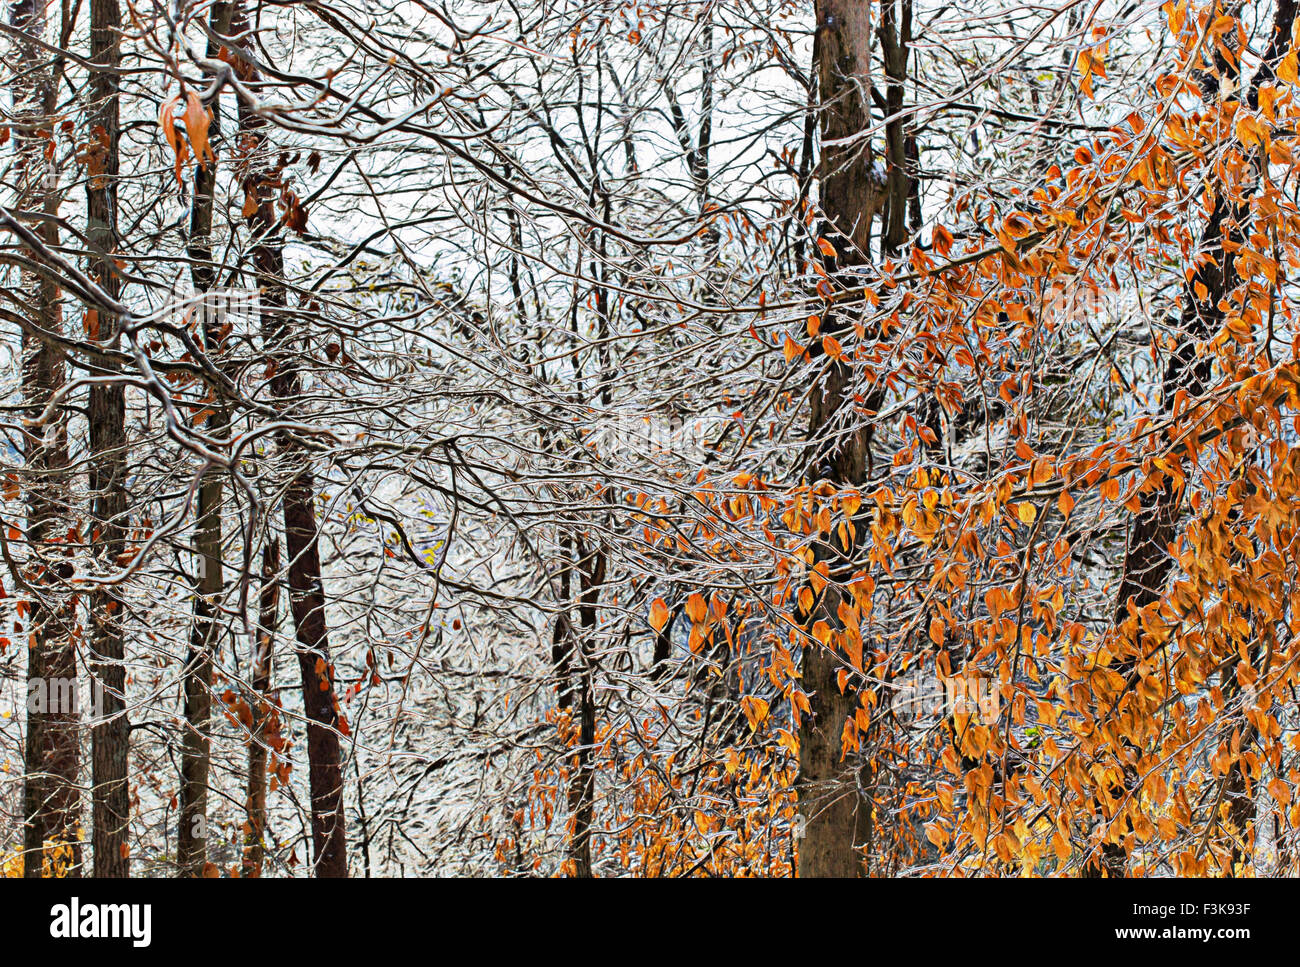 The aftermath of an ice storm with ice covering all tree branches in a wooded landscape. The beech trees retained their orange leaves. Stock Photo